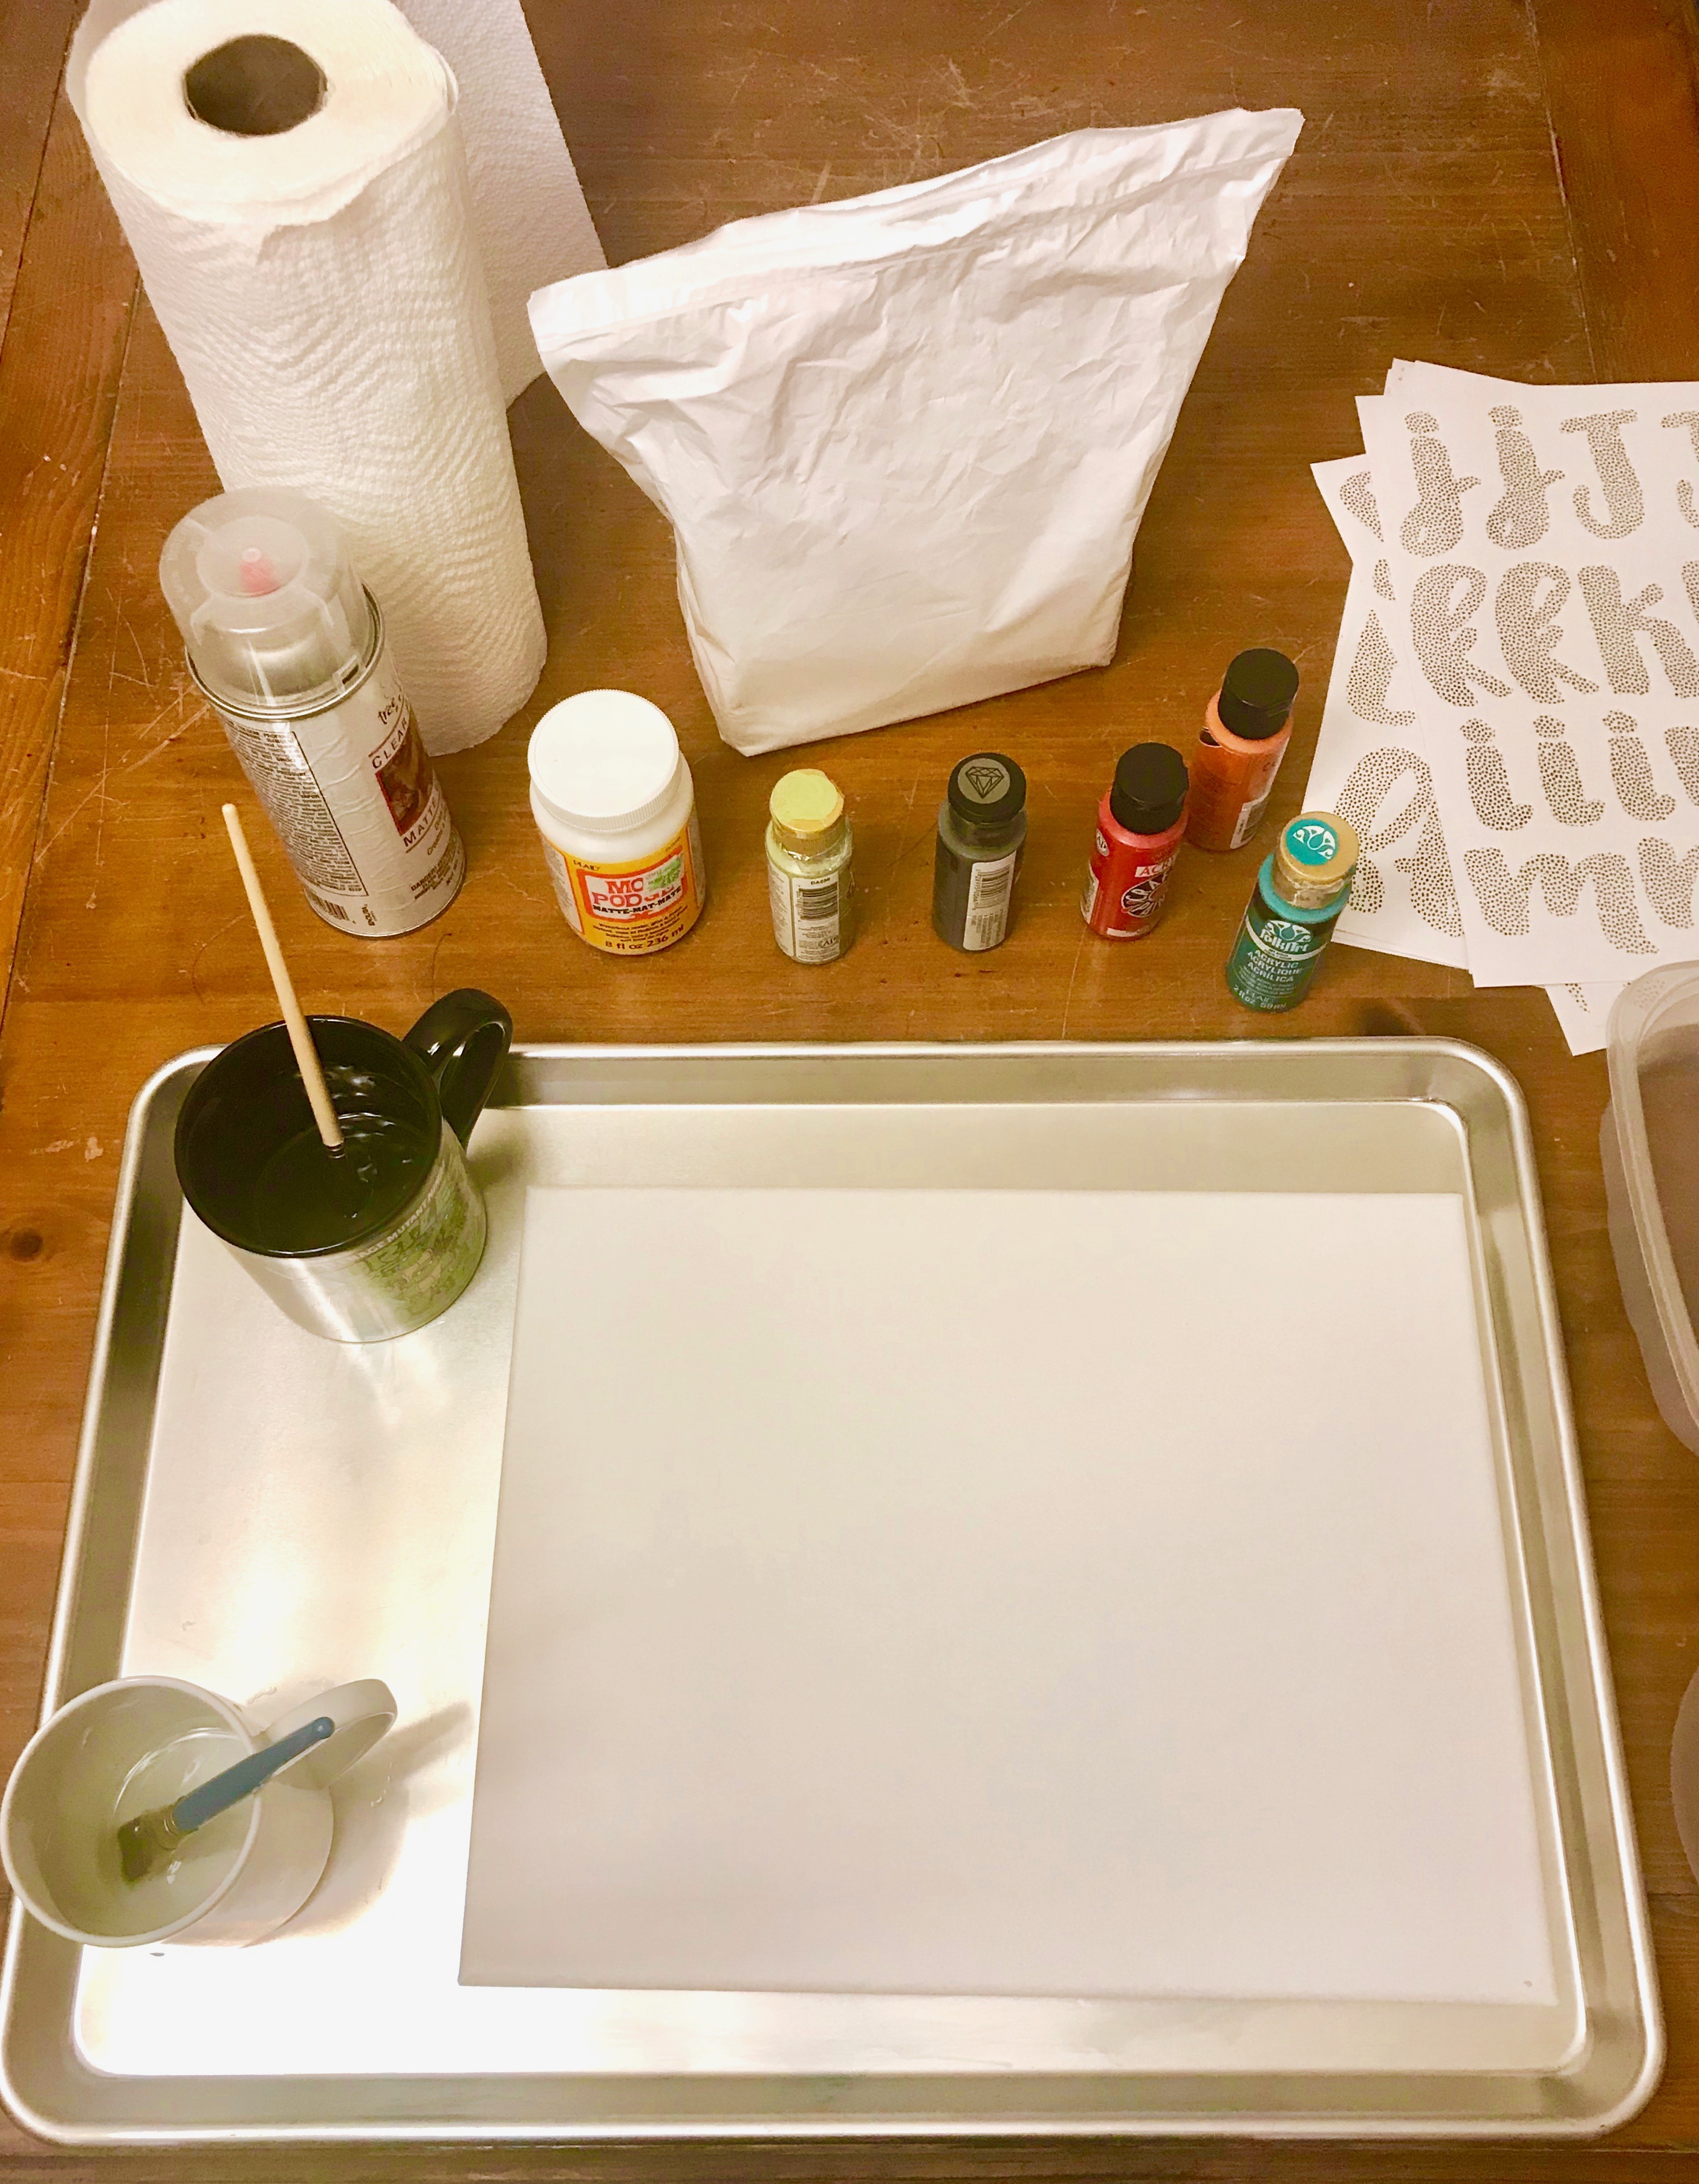 Crafting supplies including canvas, paint, and mod podge on a wood table